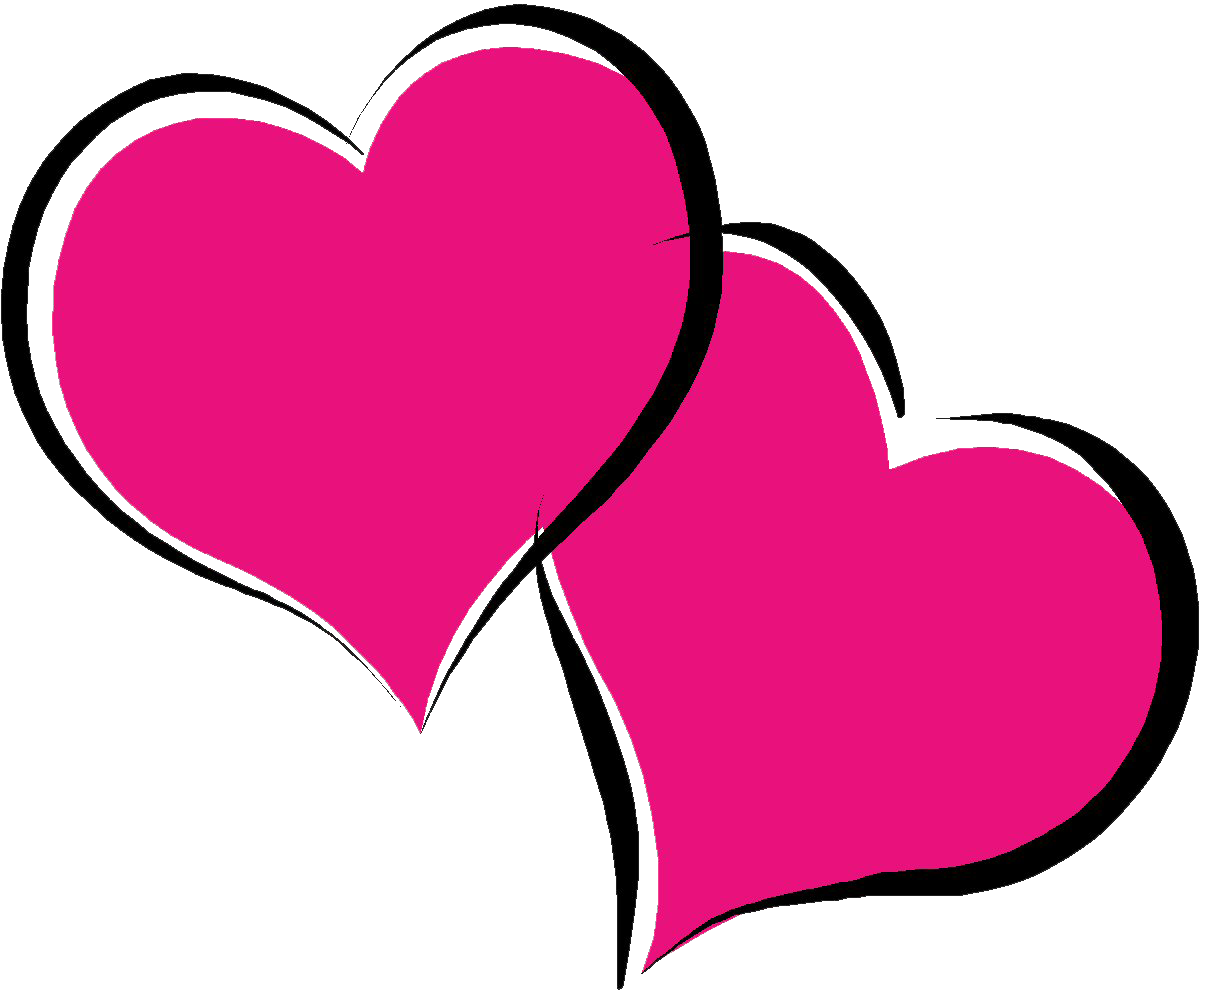 Hot Pink Heart PNG Image